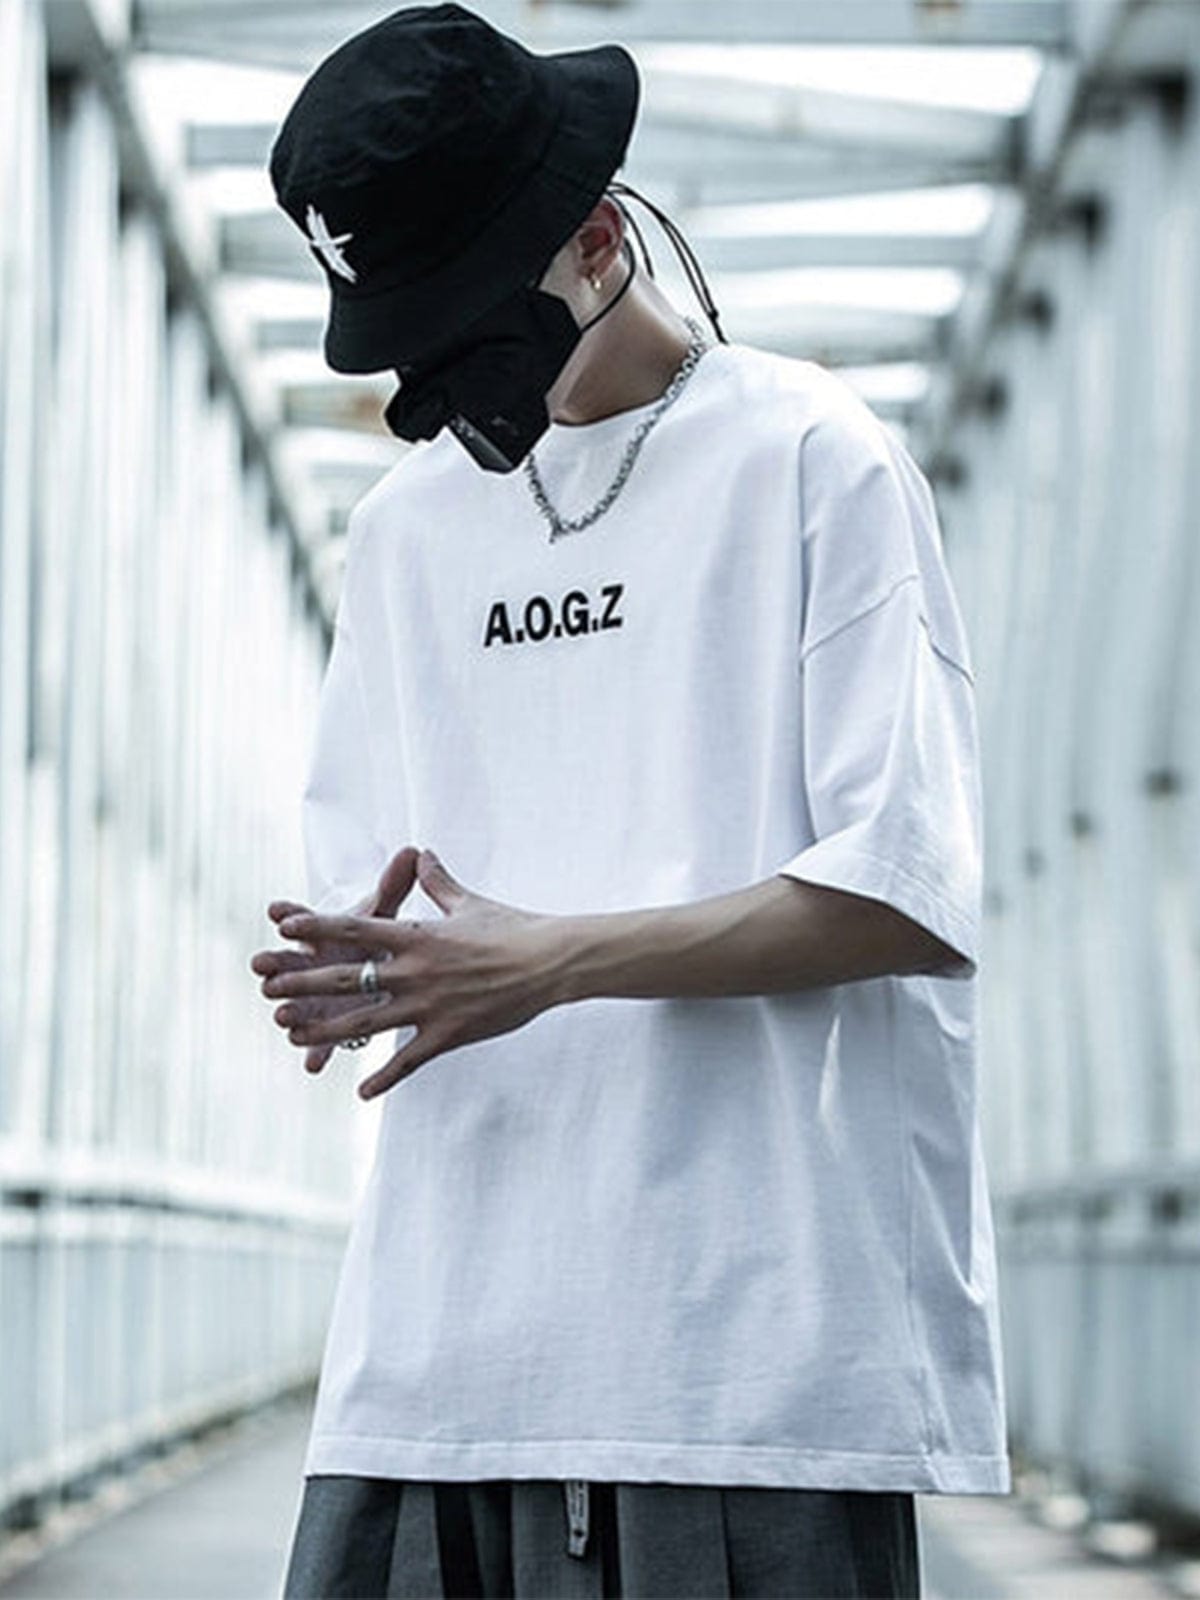 Function Reflective Letter Print Tee Streetwear Brand Techwear Combat Tactical YUGEN THEORY